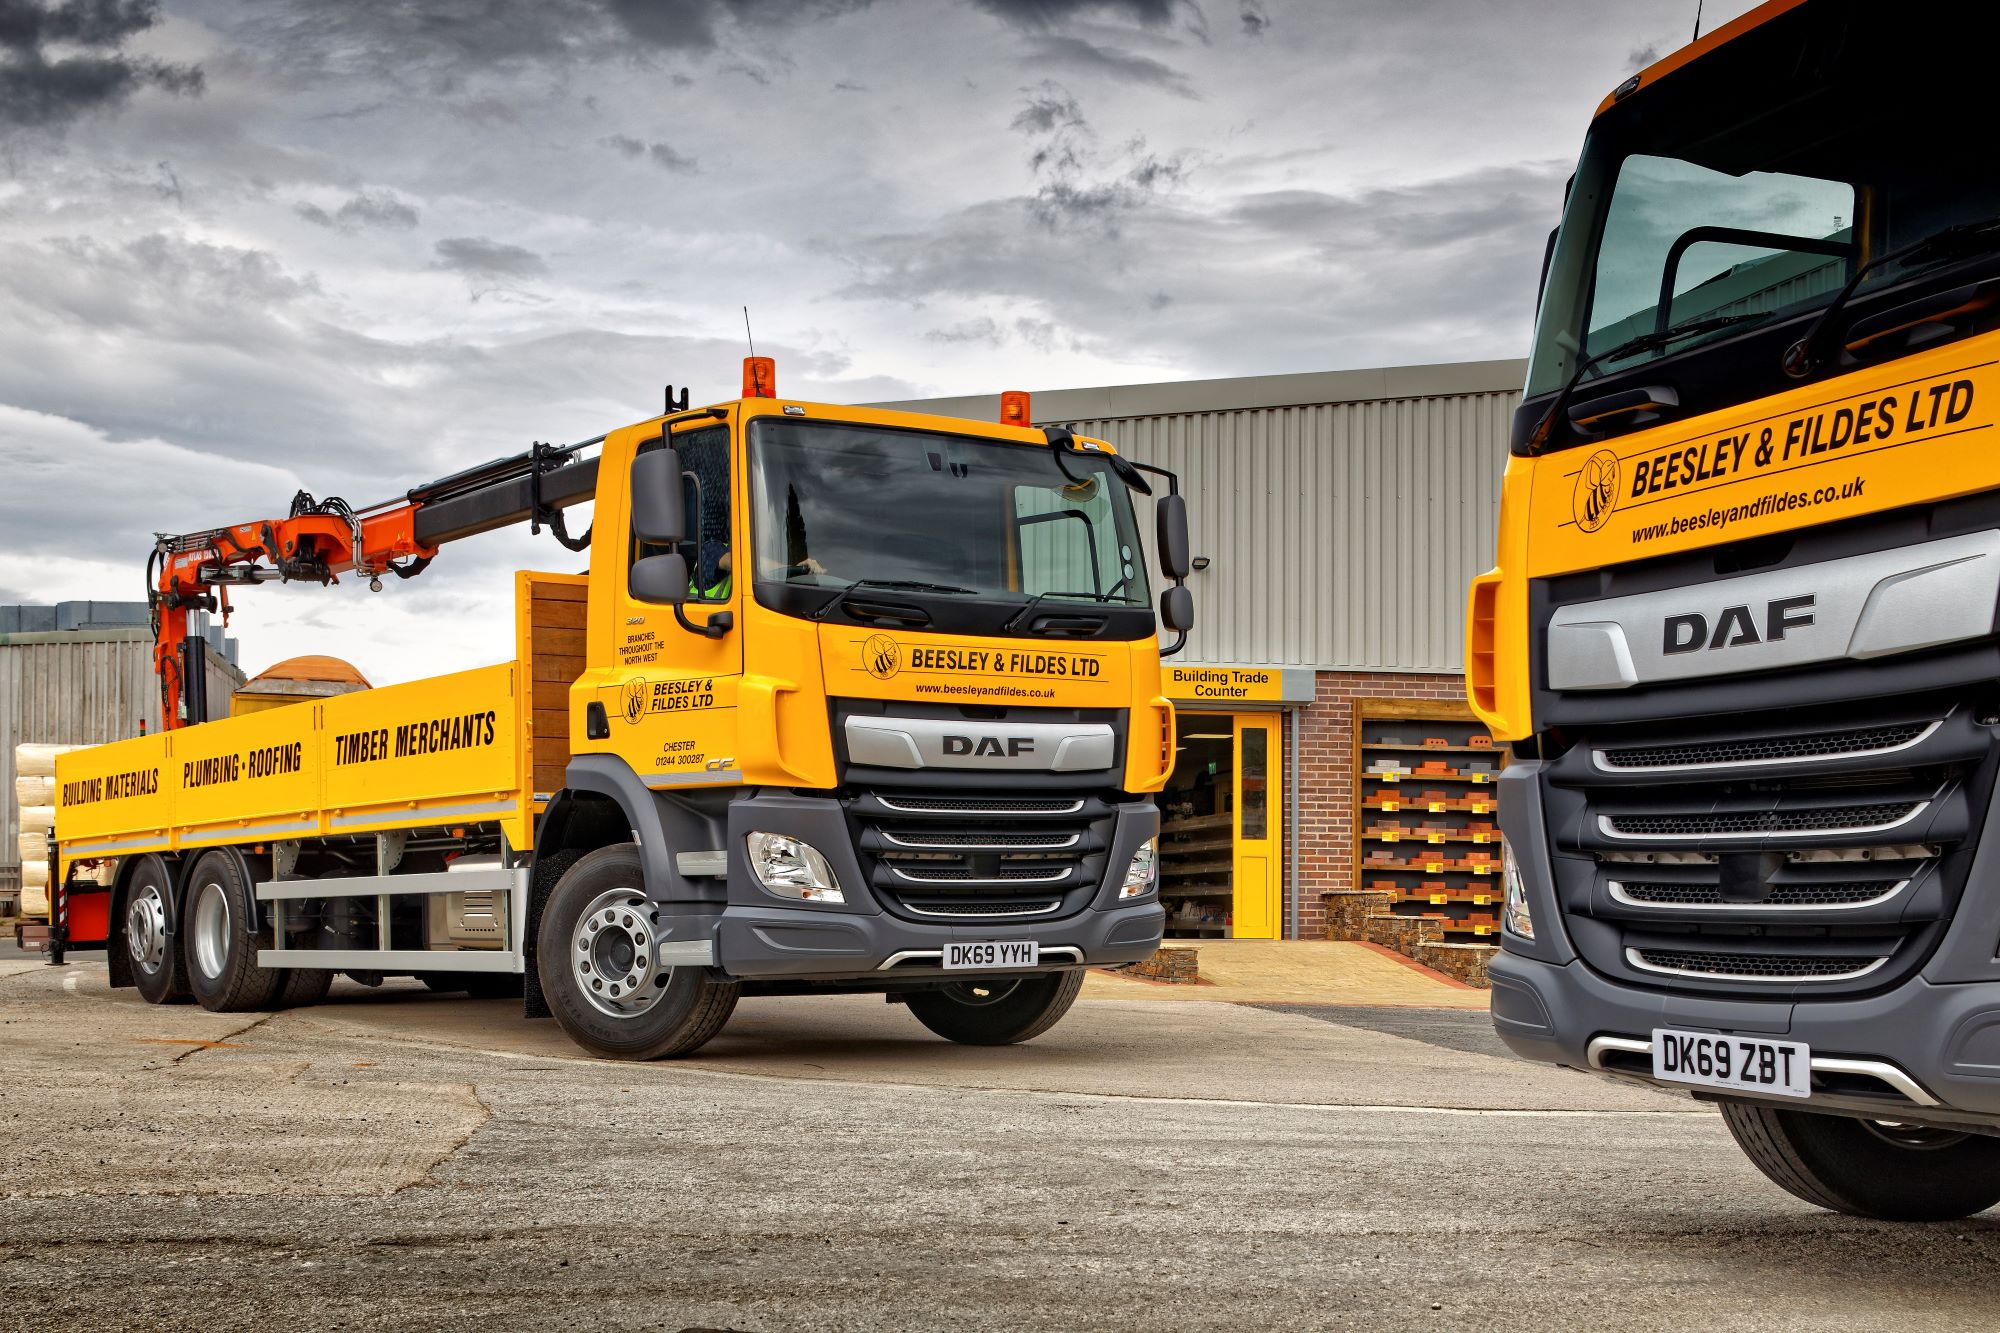 As part of its environmental sustainability strategy, Beesley & Fildes has invested £7m in a new fleet of vehicles.